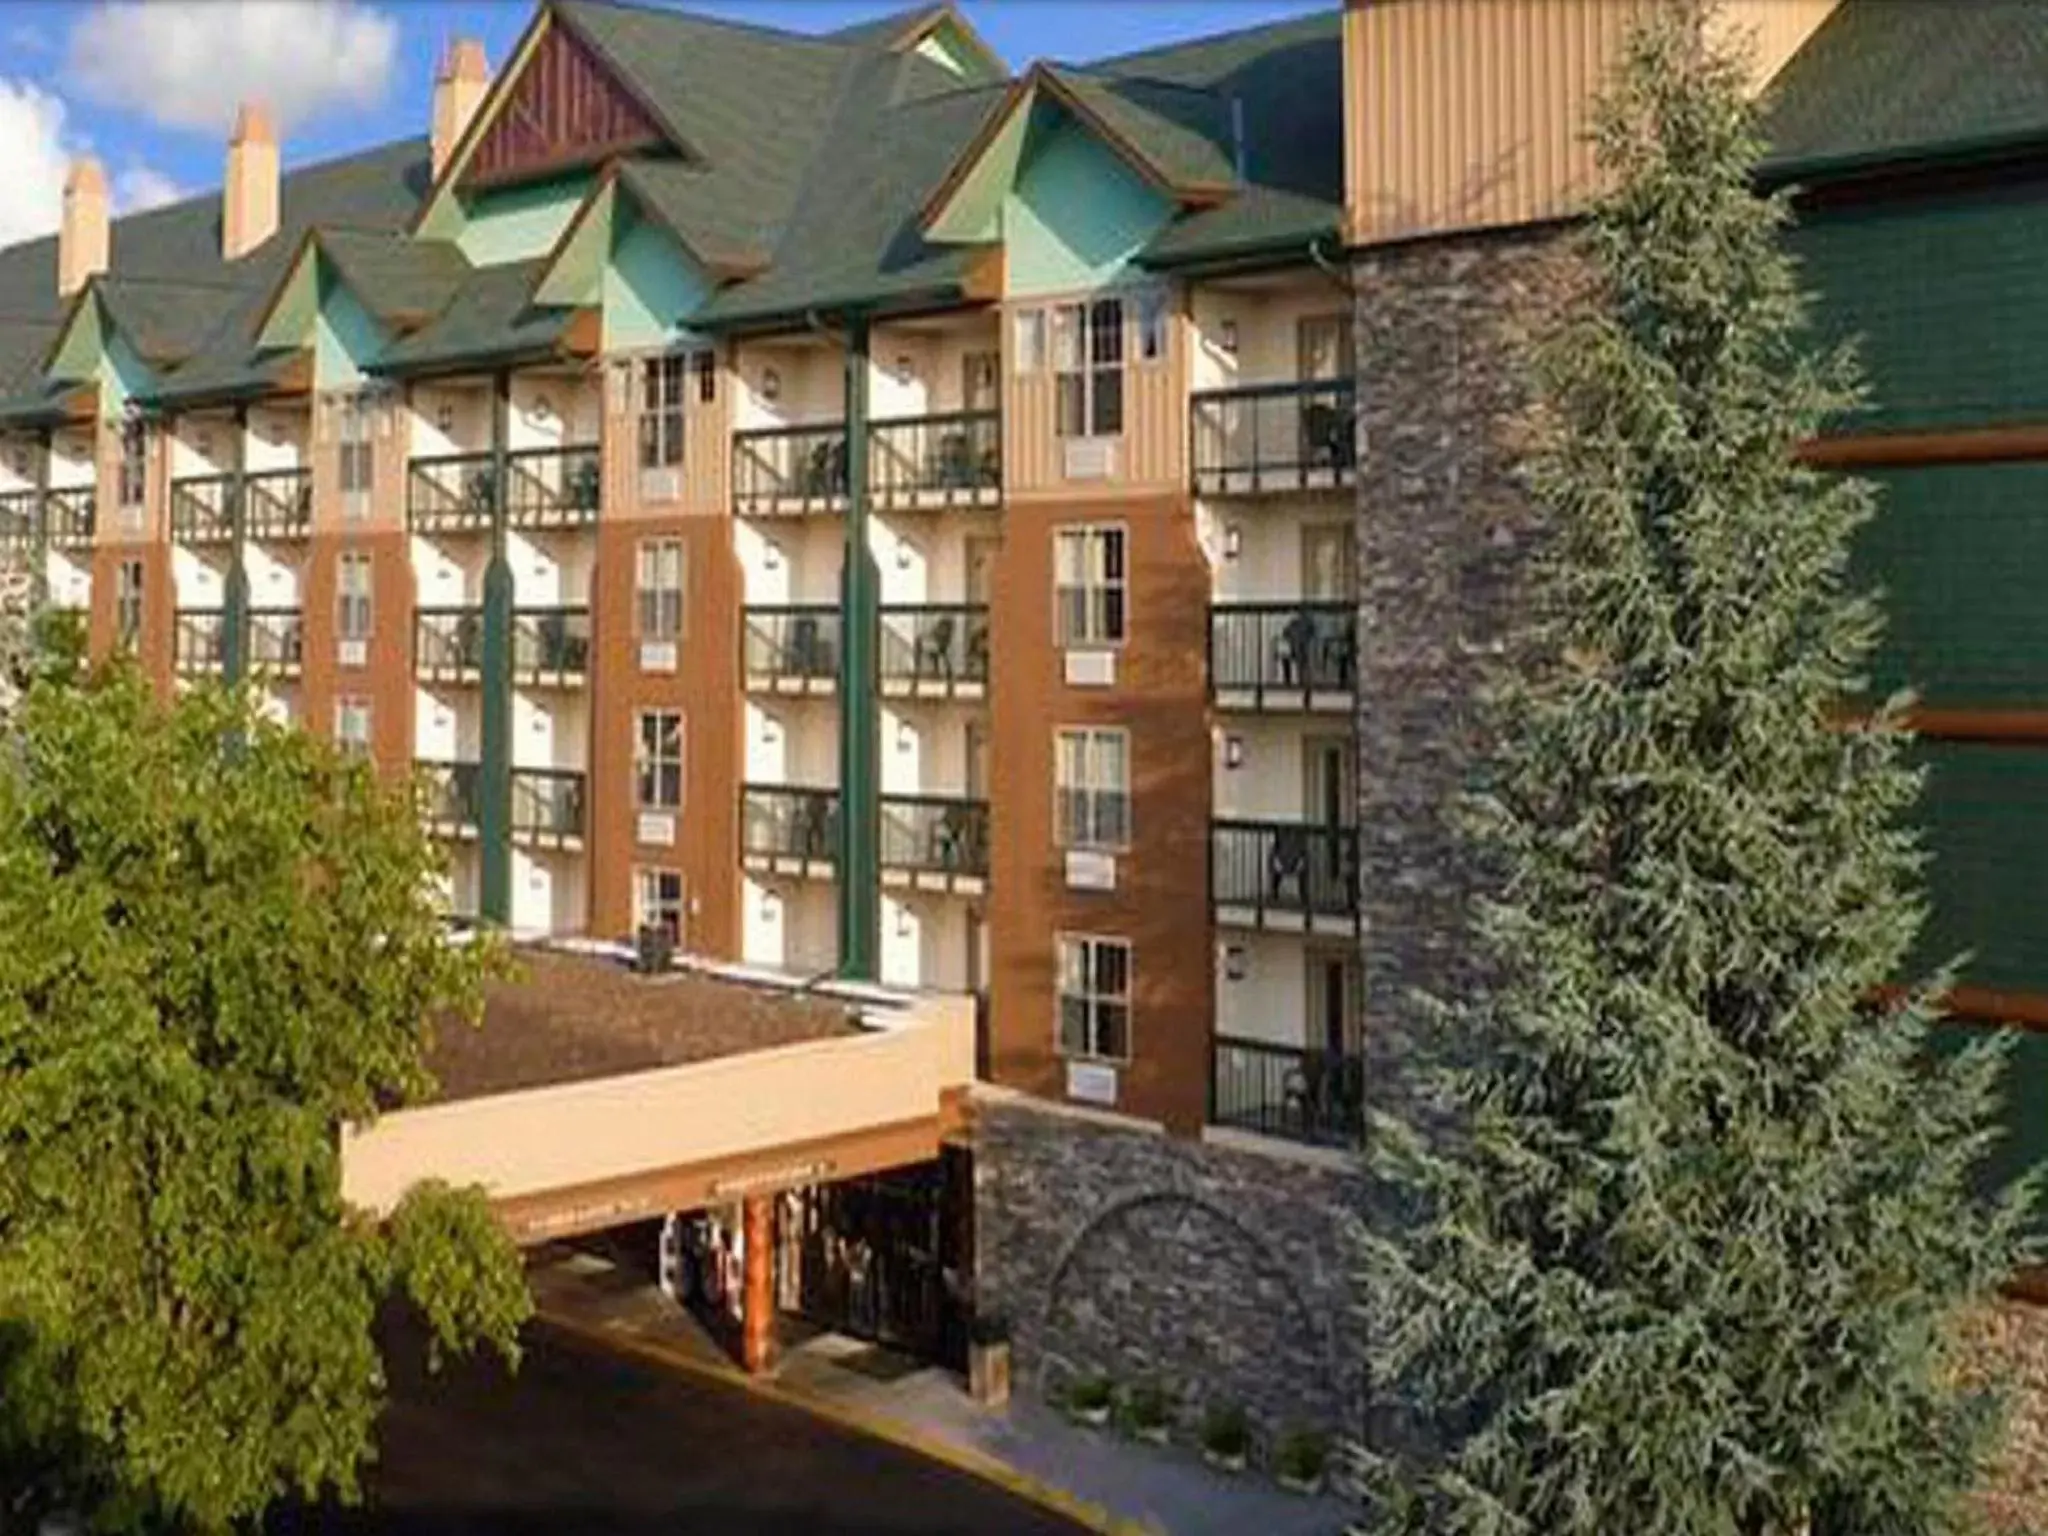 Facade/entrance in Grand Smokies Resort Lodge Pigeon Forge